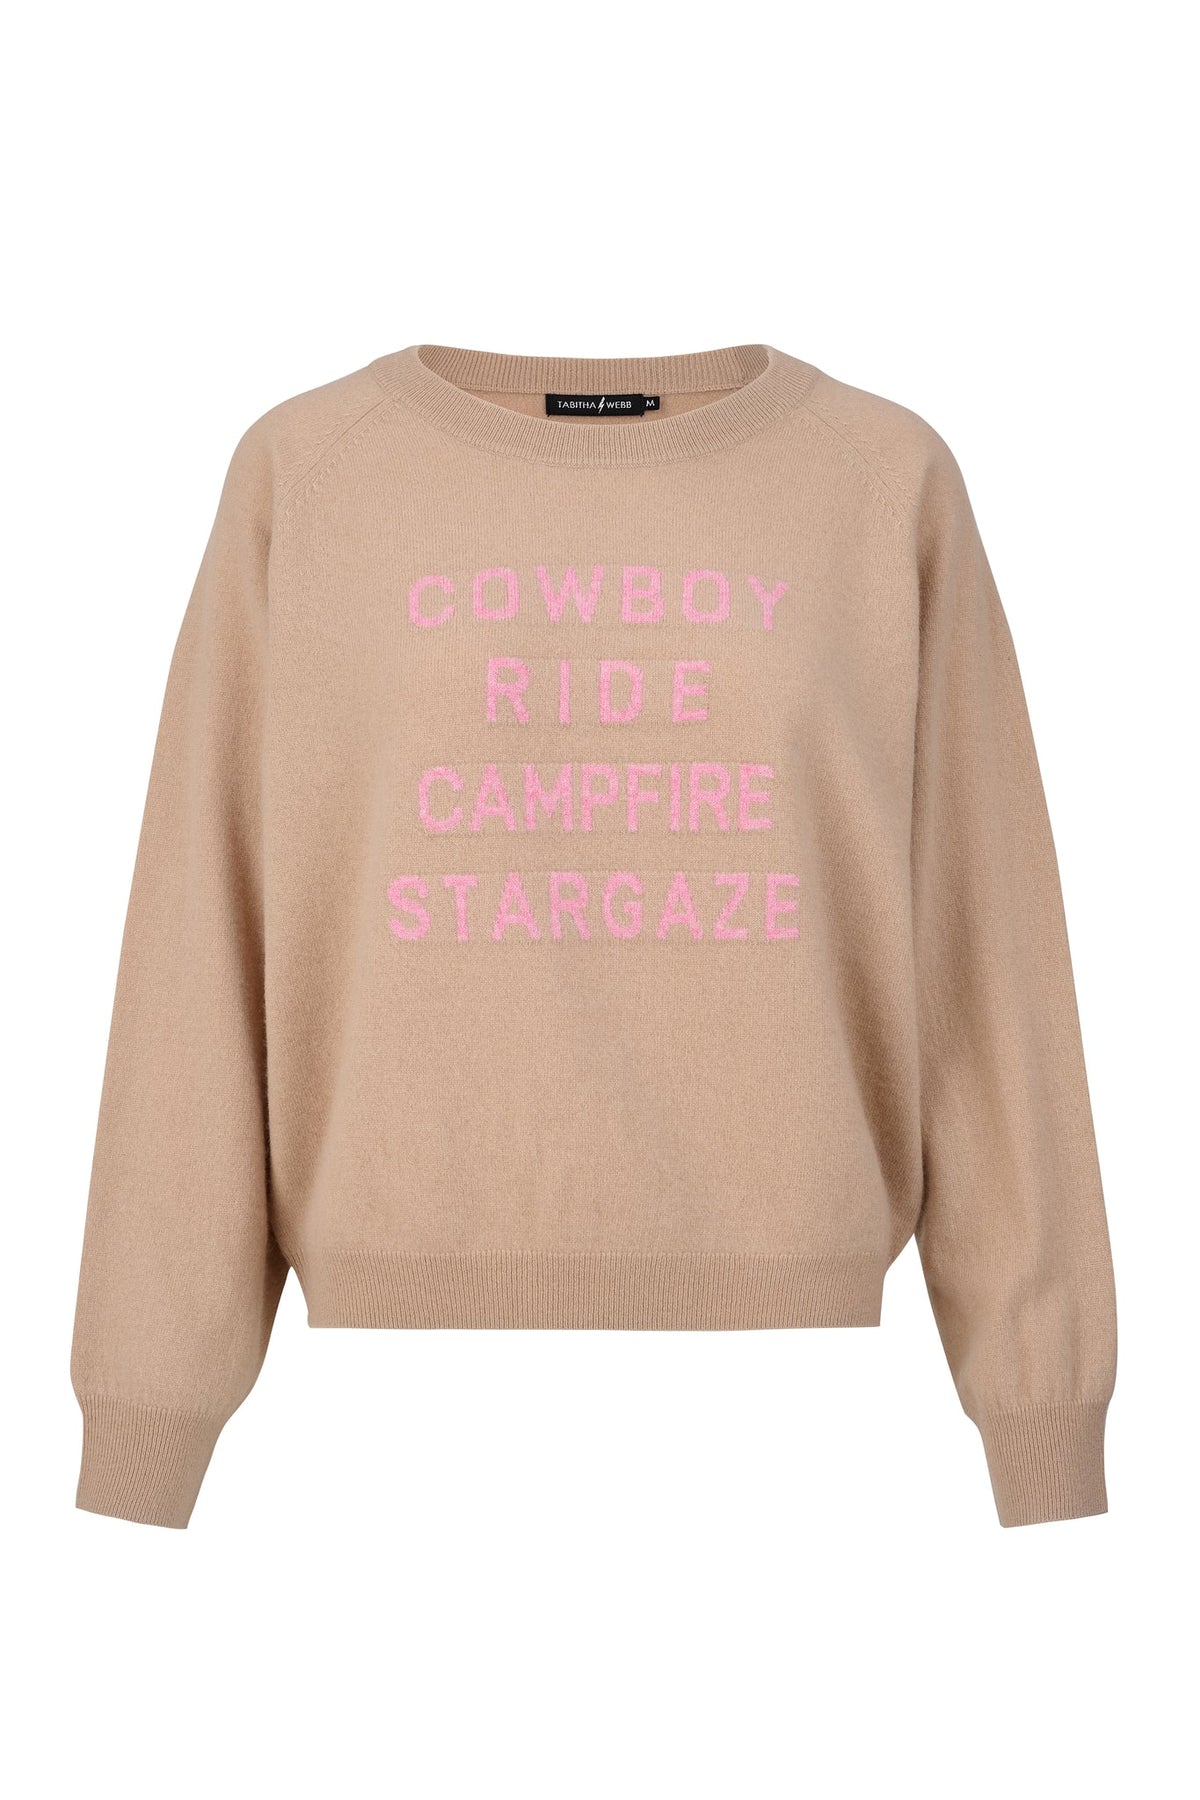 Wool and cashmere blend jumper with cowboy ride campfire stargaze slogan in pink 